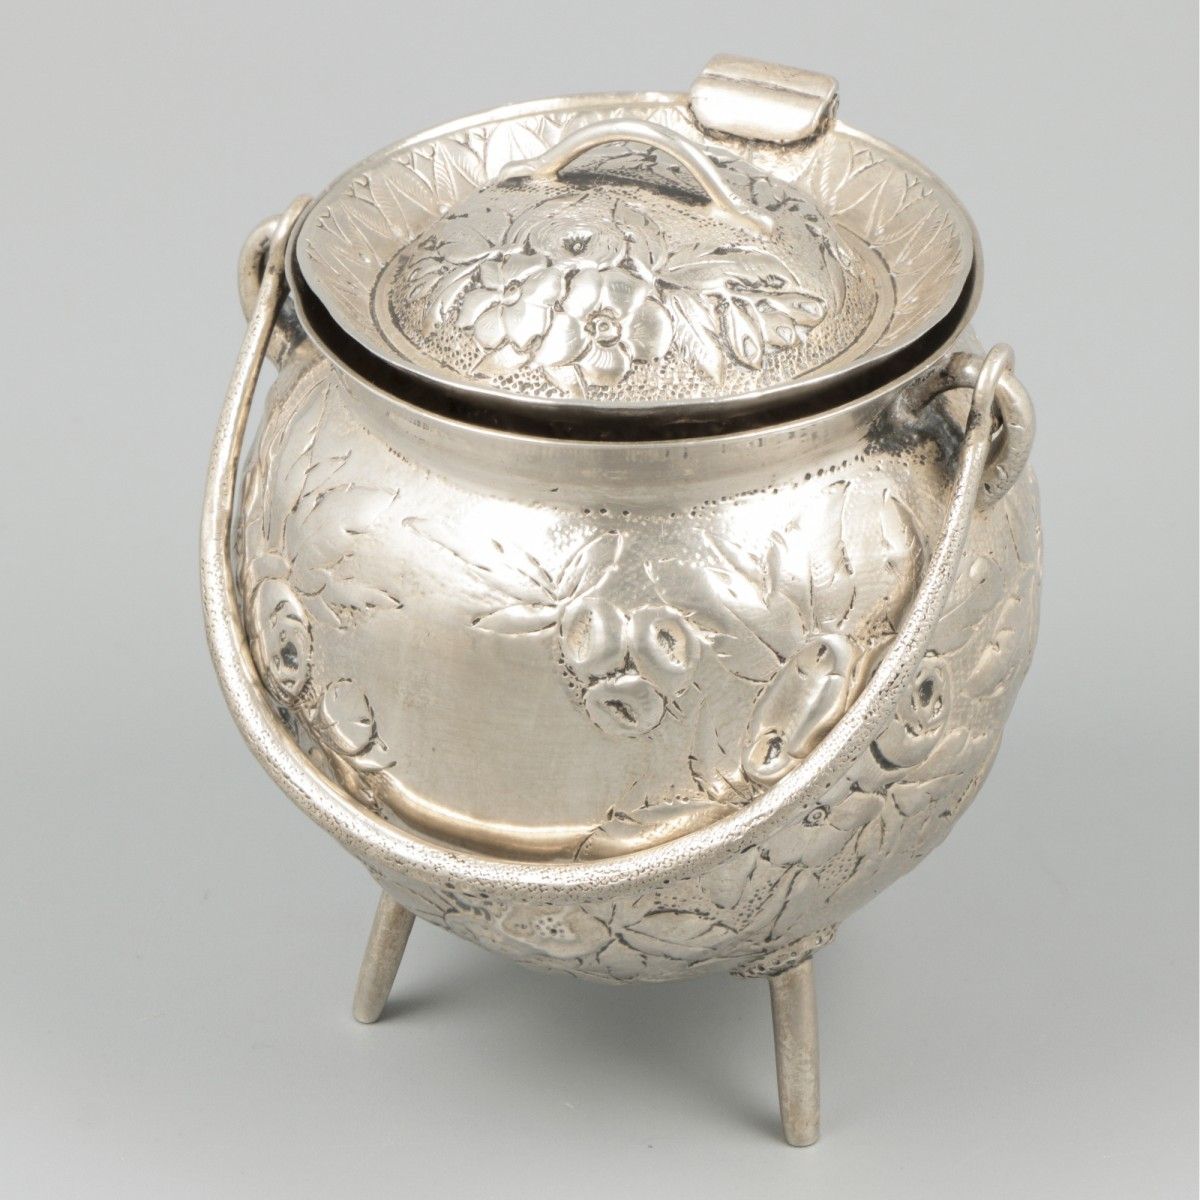 Miniature cooking pot silver. Large model cooking pot, full of details. Mid 20th&hellip;